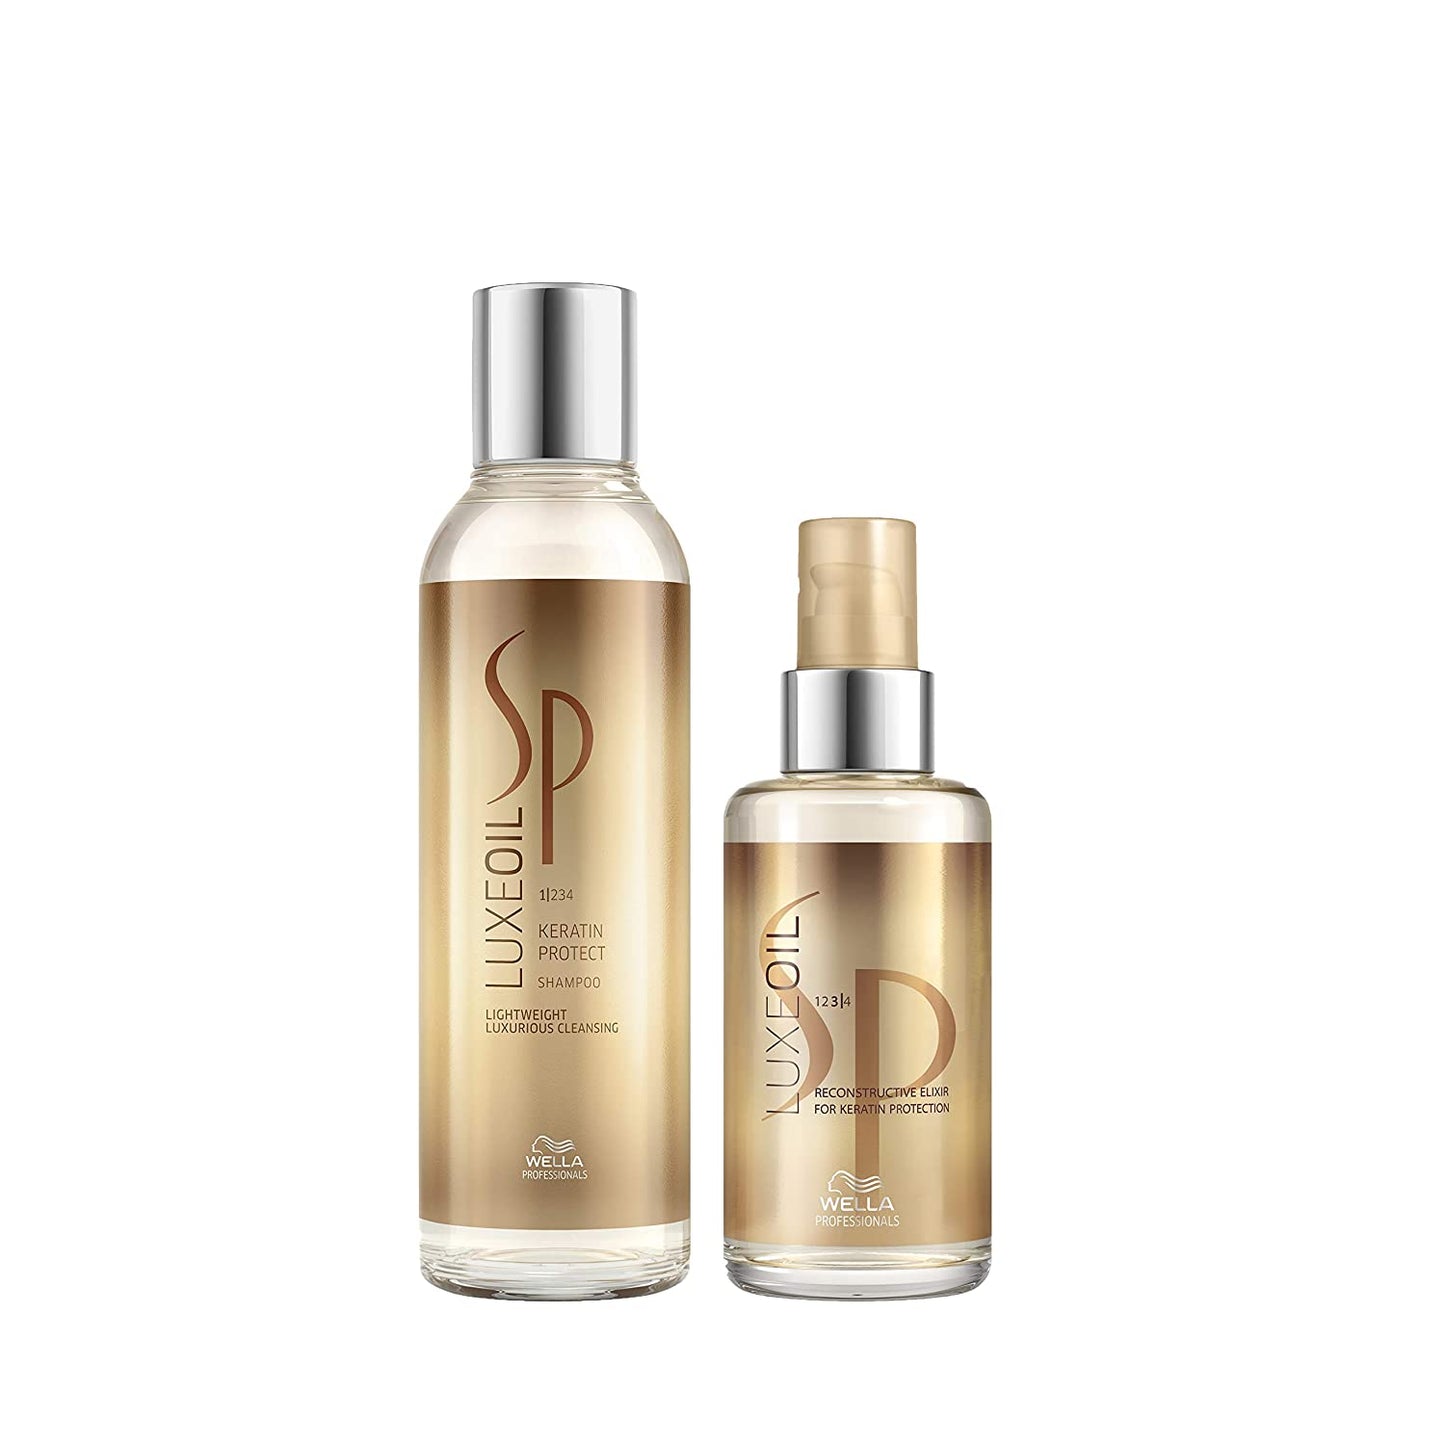 Wella Professionals SP Sp Luxeoil Shampoo 200ml and Reconstructive Elixir 30ml For Keratin Protection, 2 Pieces